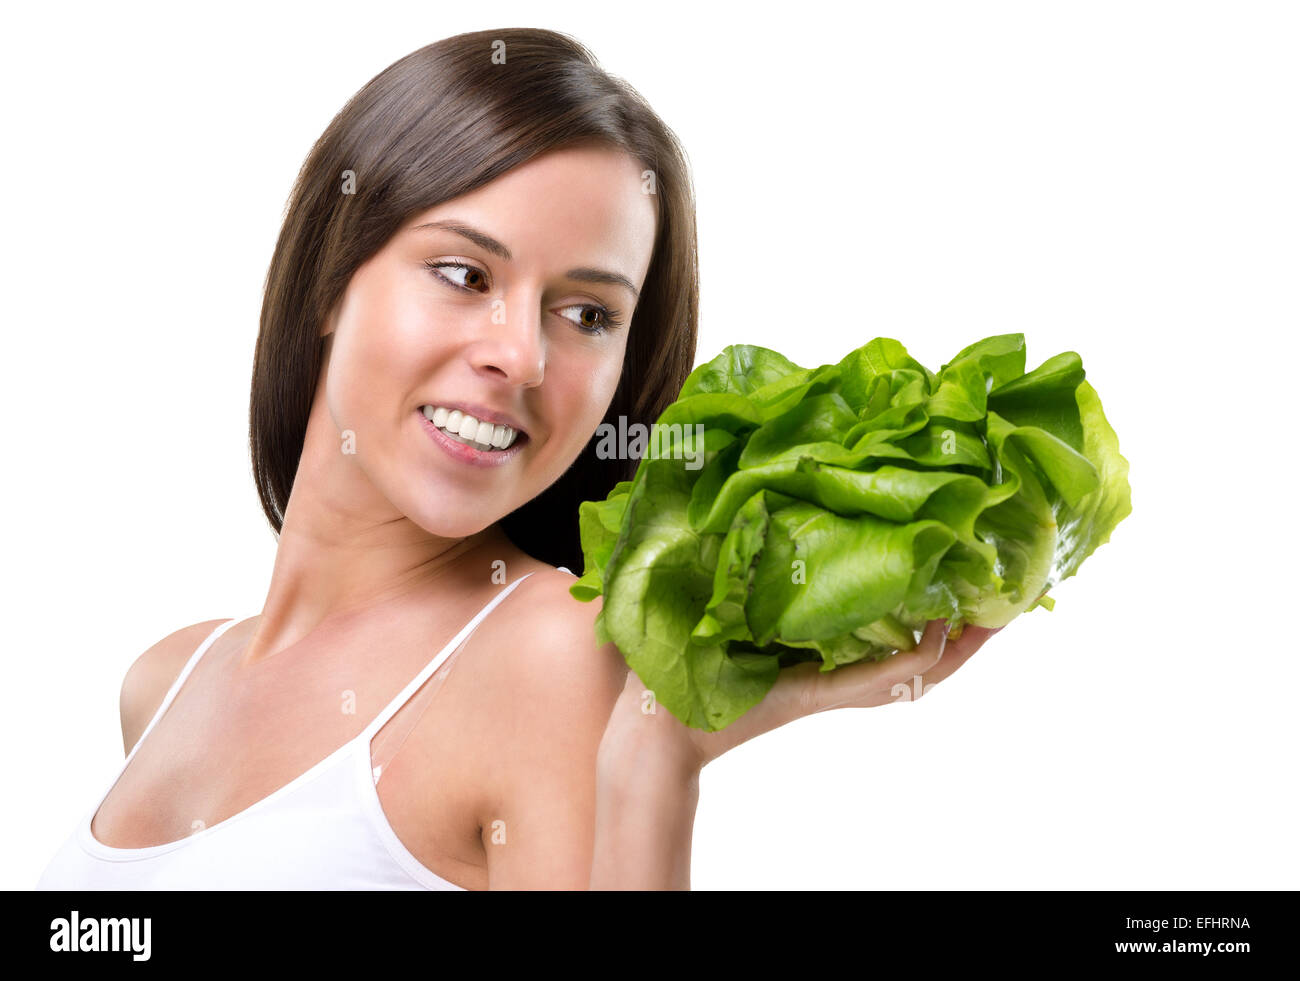 Eat healthy! Pretty woman holding a salad Stock Photo